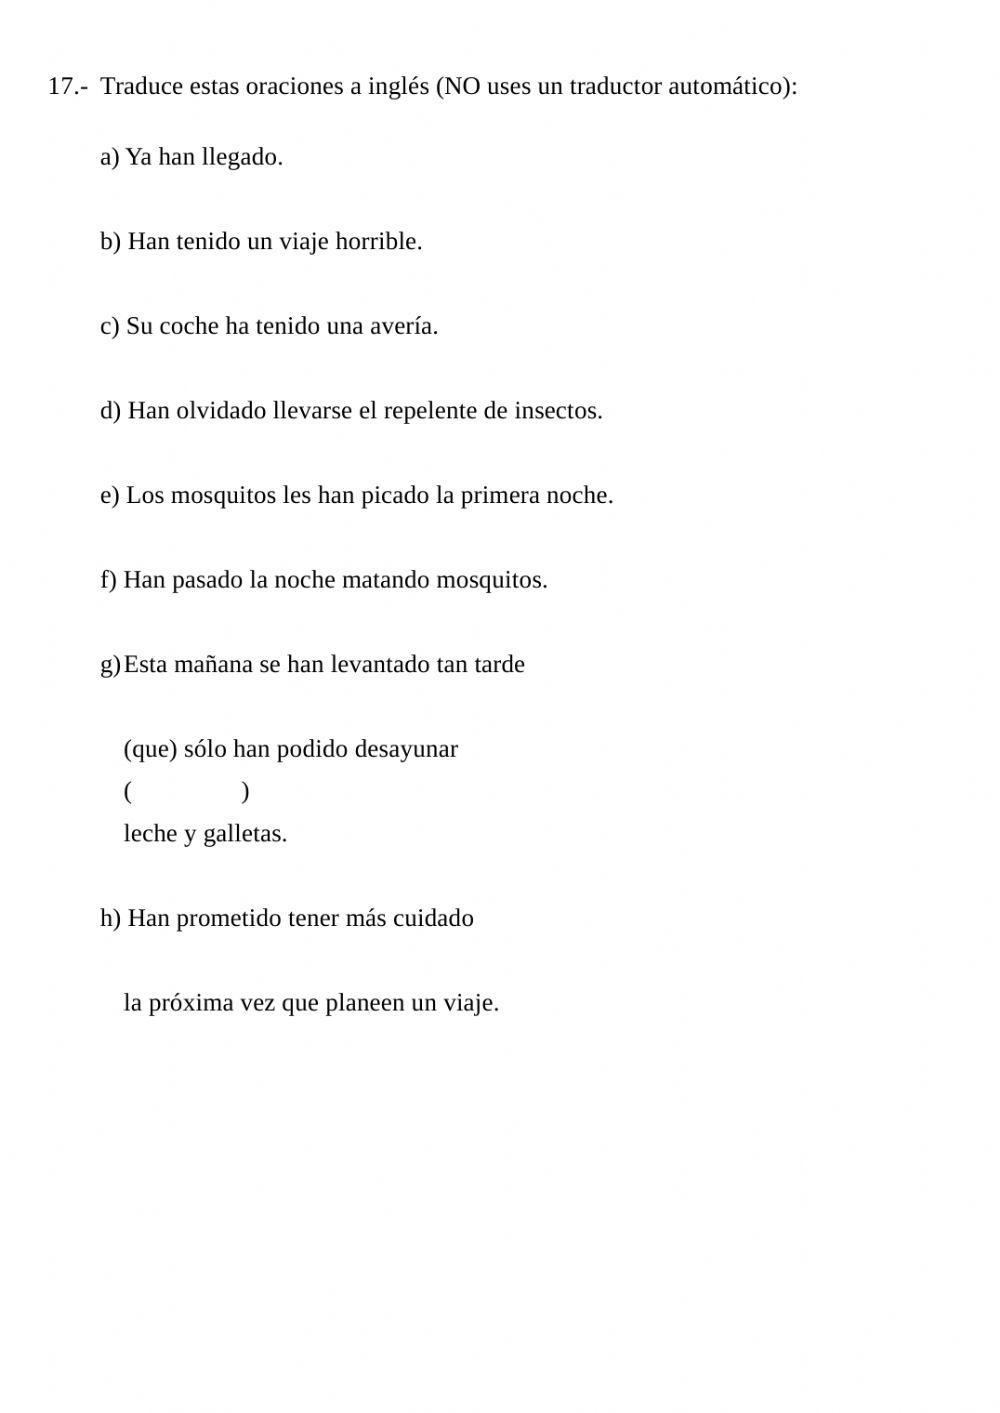 Review work 15 - Translation from Spanish (present perfect)